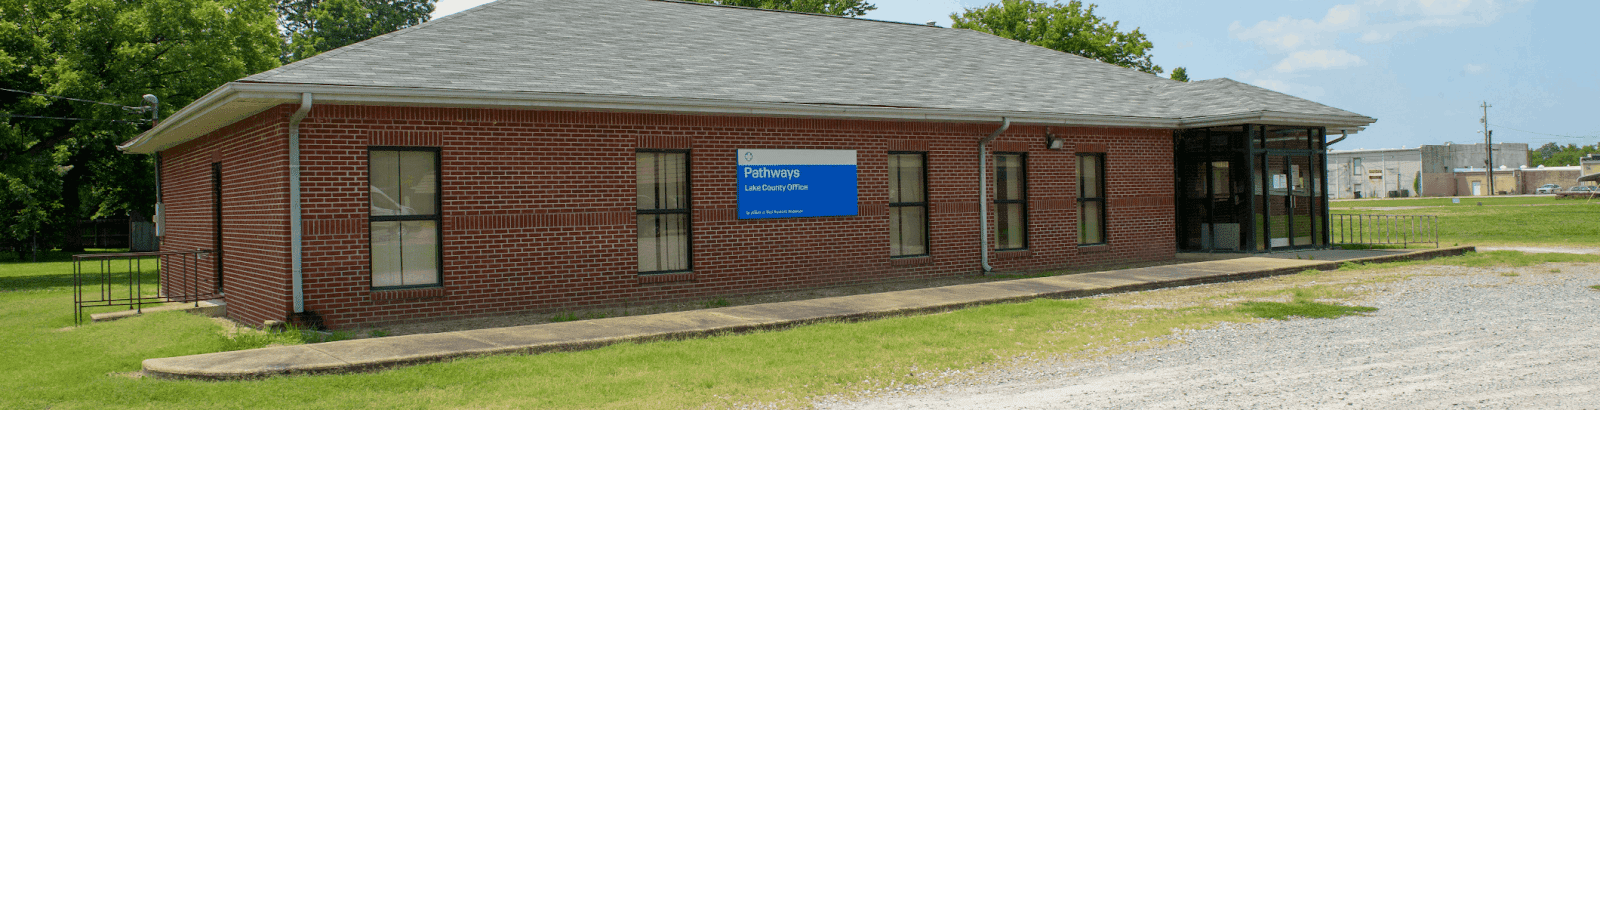 Pathways - Lake County Office